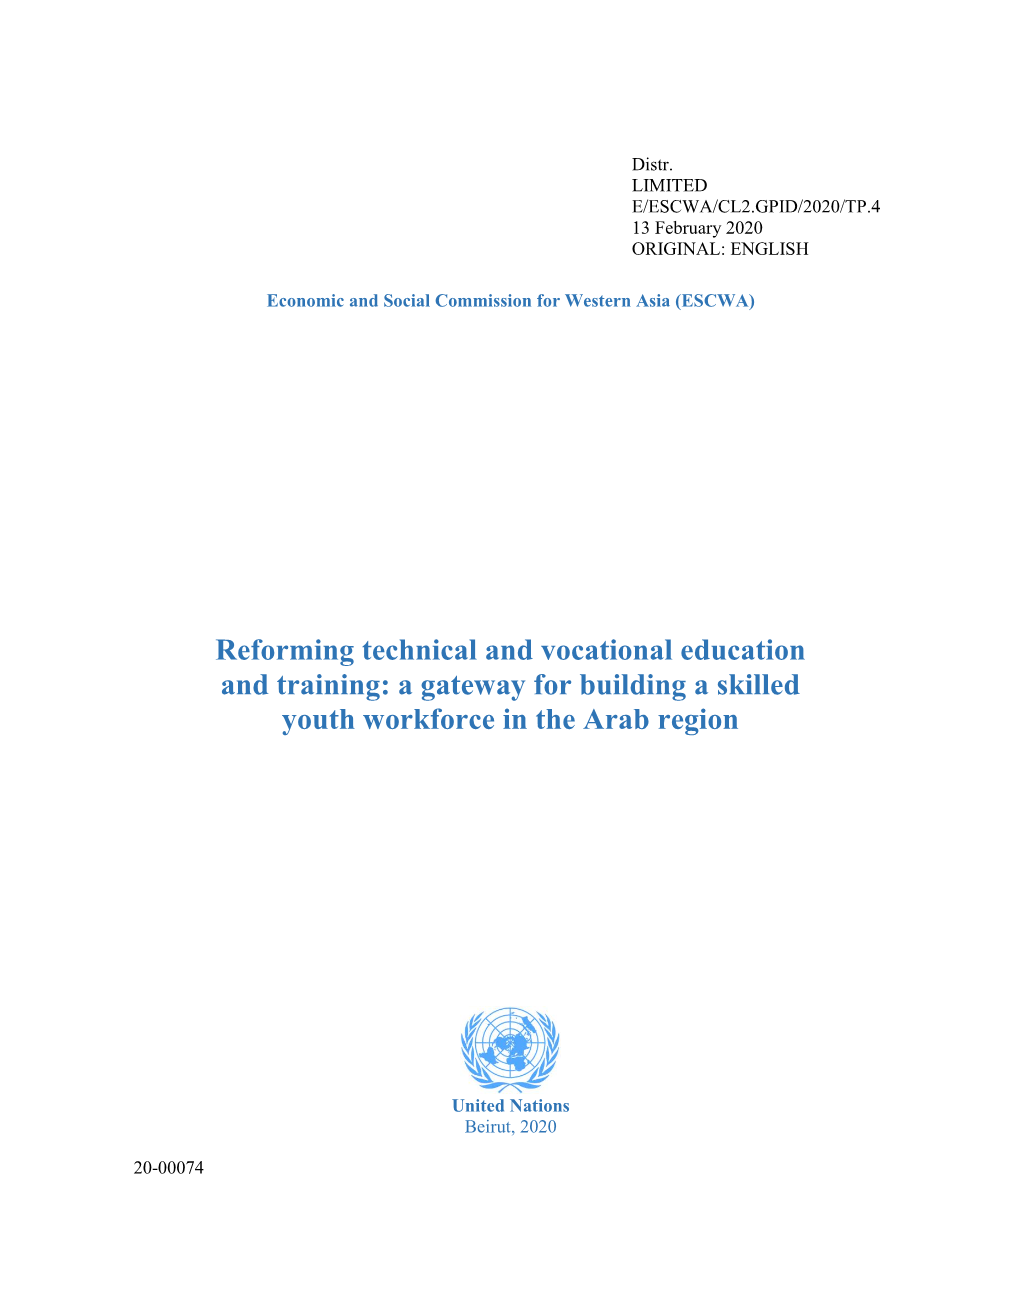 Reforming Technical and Vocational Education and Training: a Gateway for Building a Skilled Youth Workforce in the Arab Region